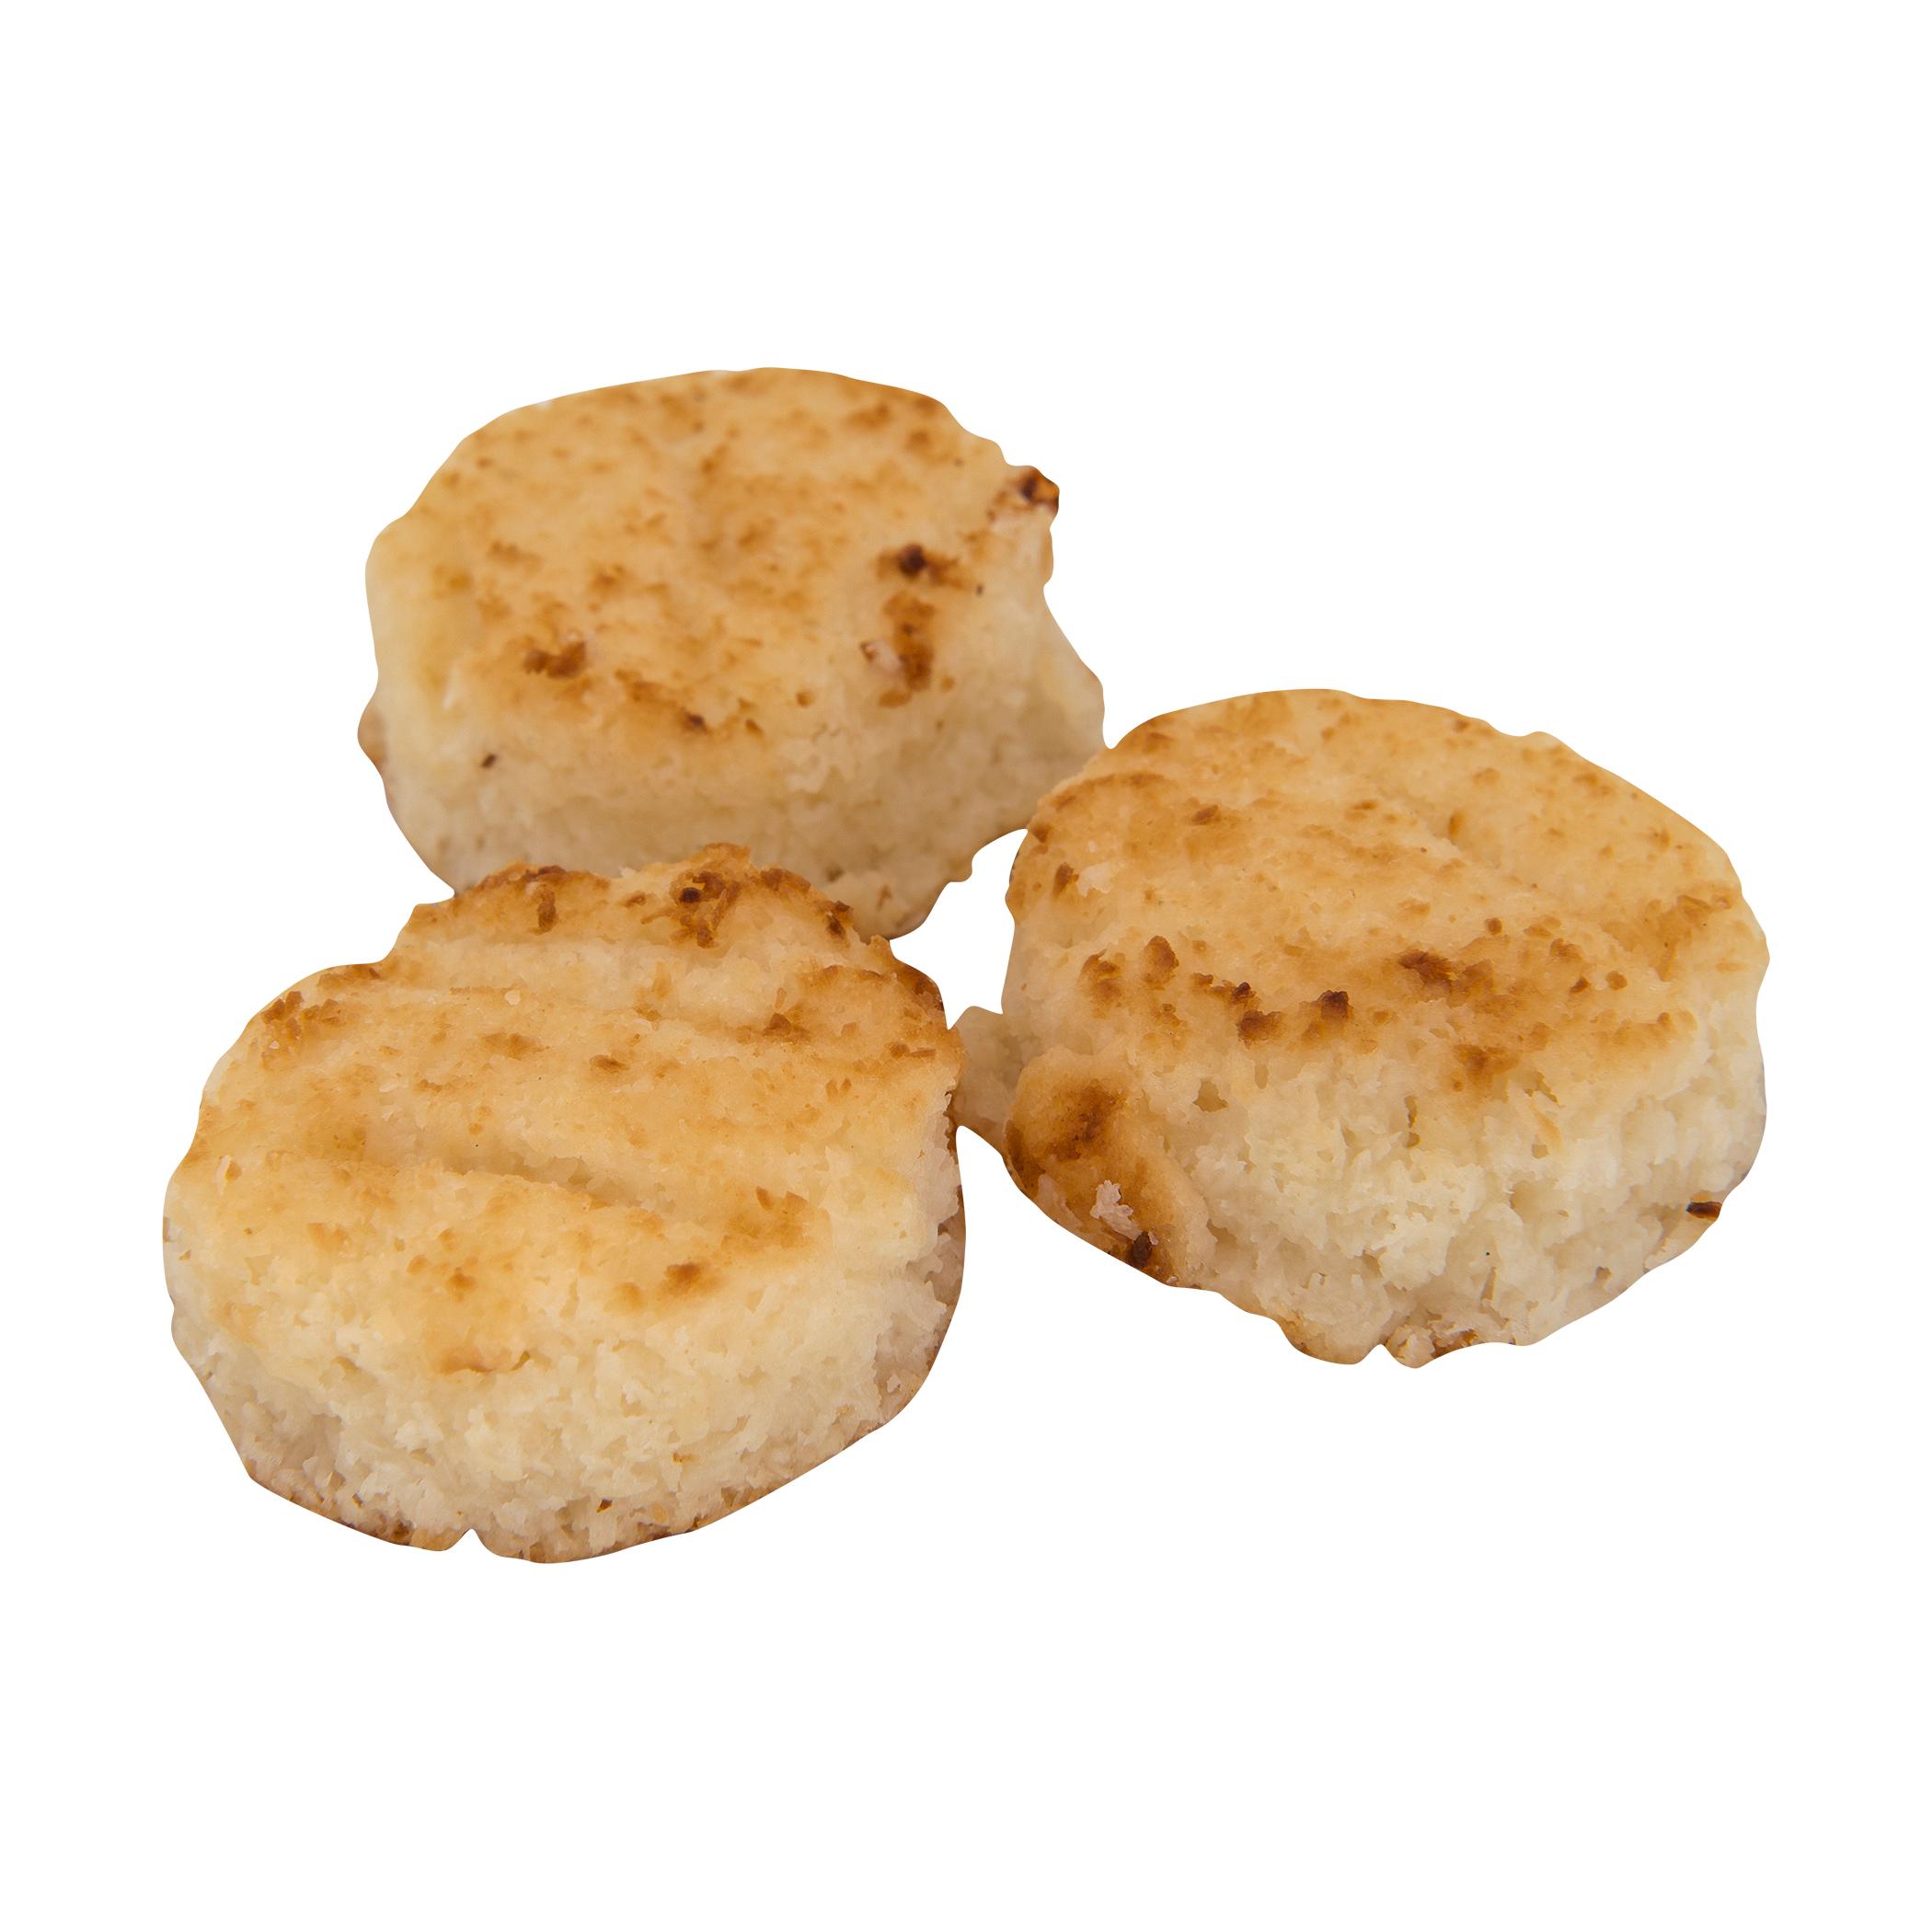  Coconut Macaroons Candy - 1 Lb.